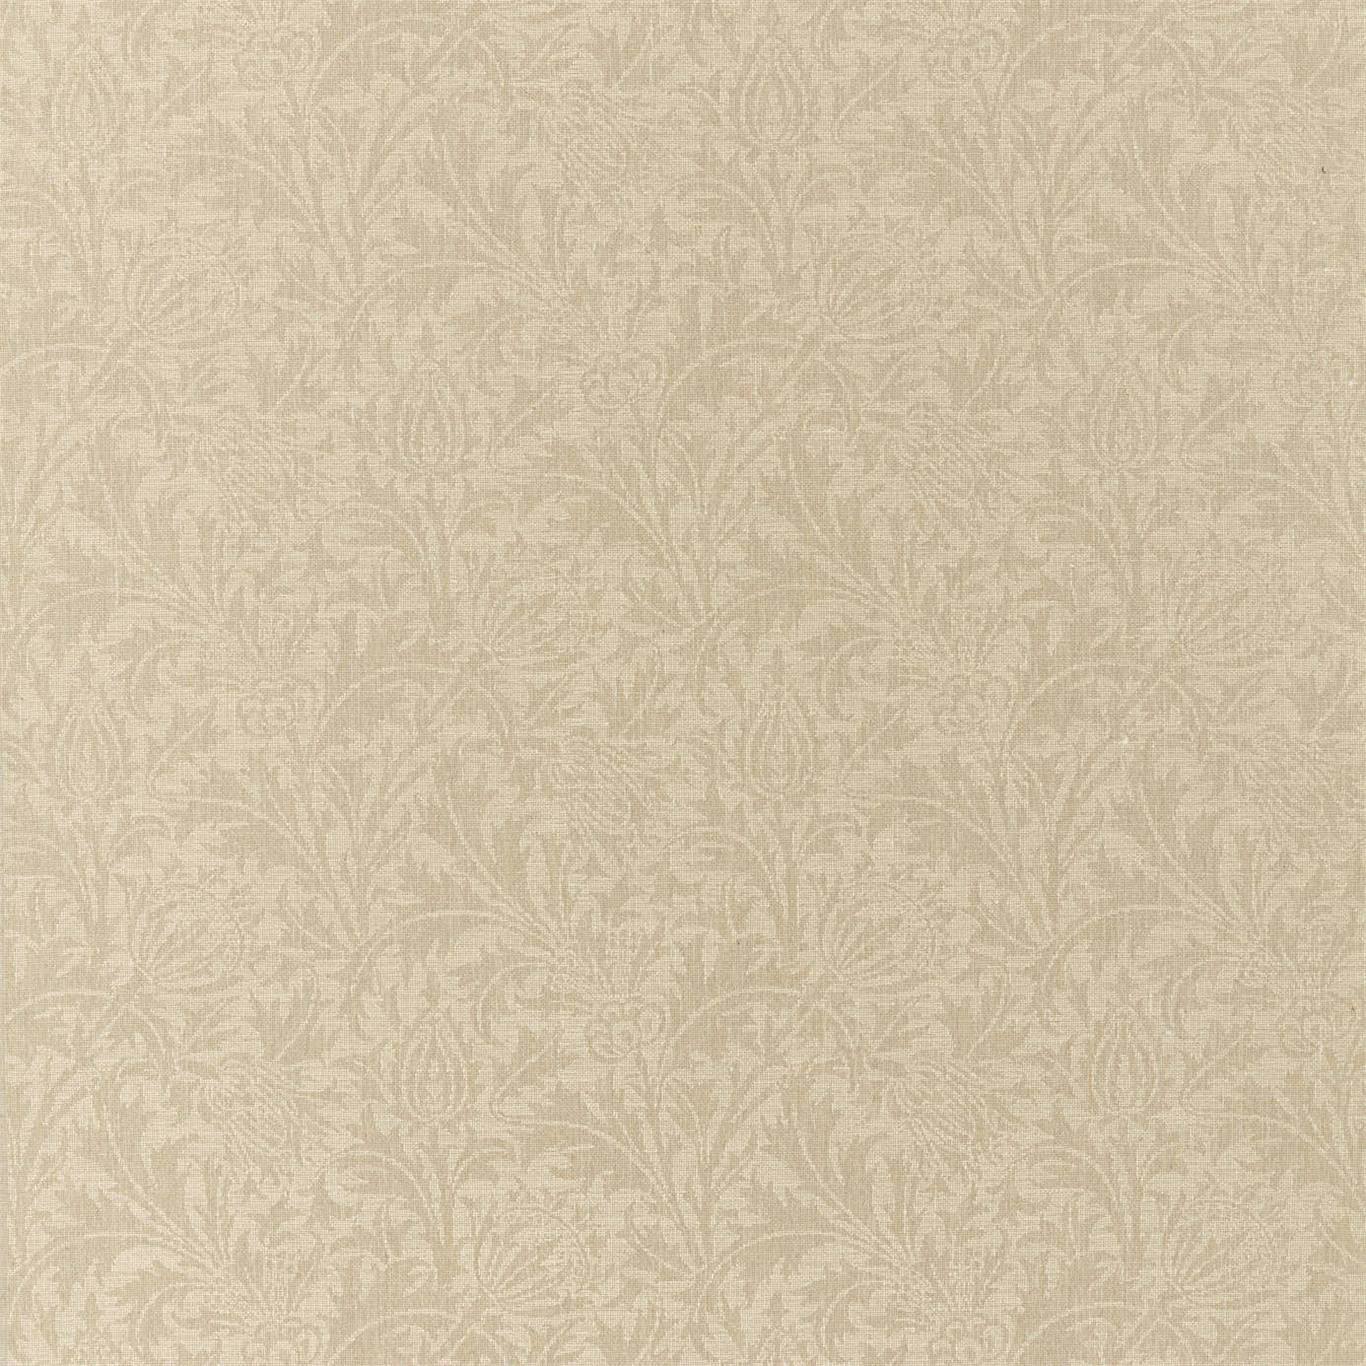 Thistle Weave Linen Fabric by MOR